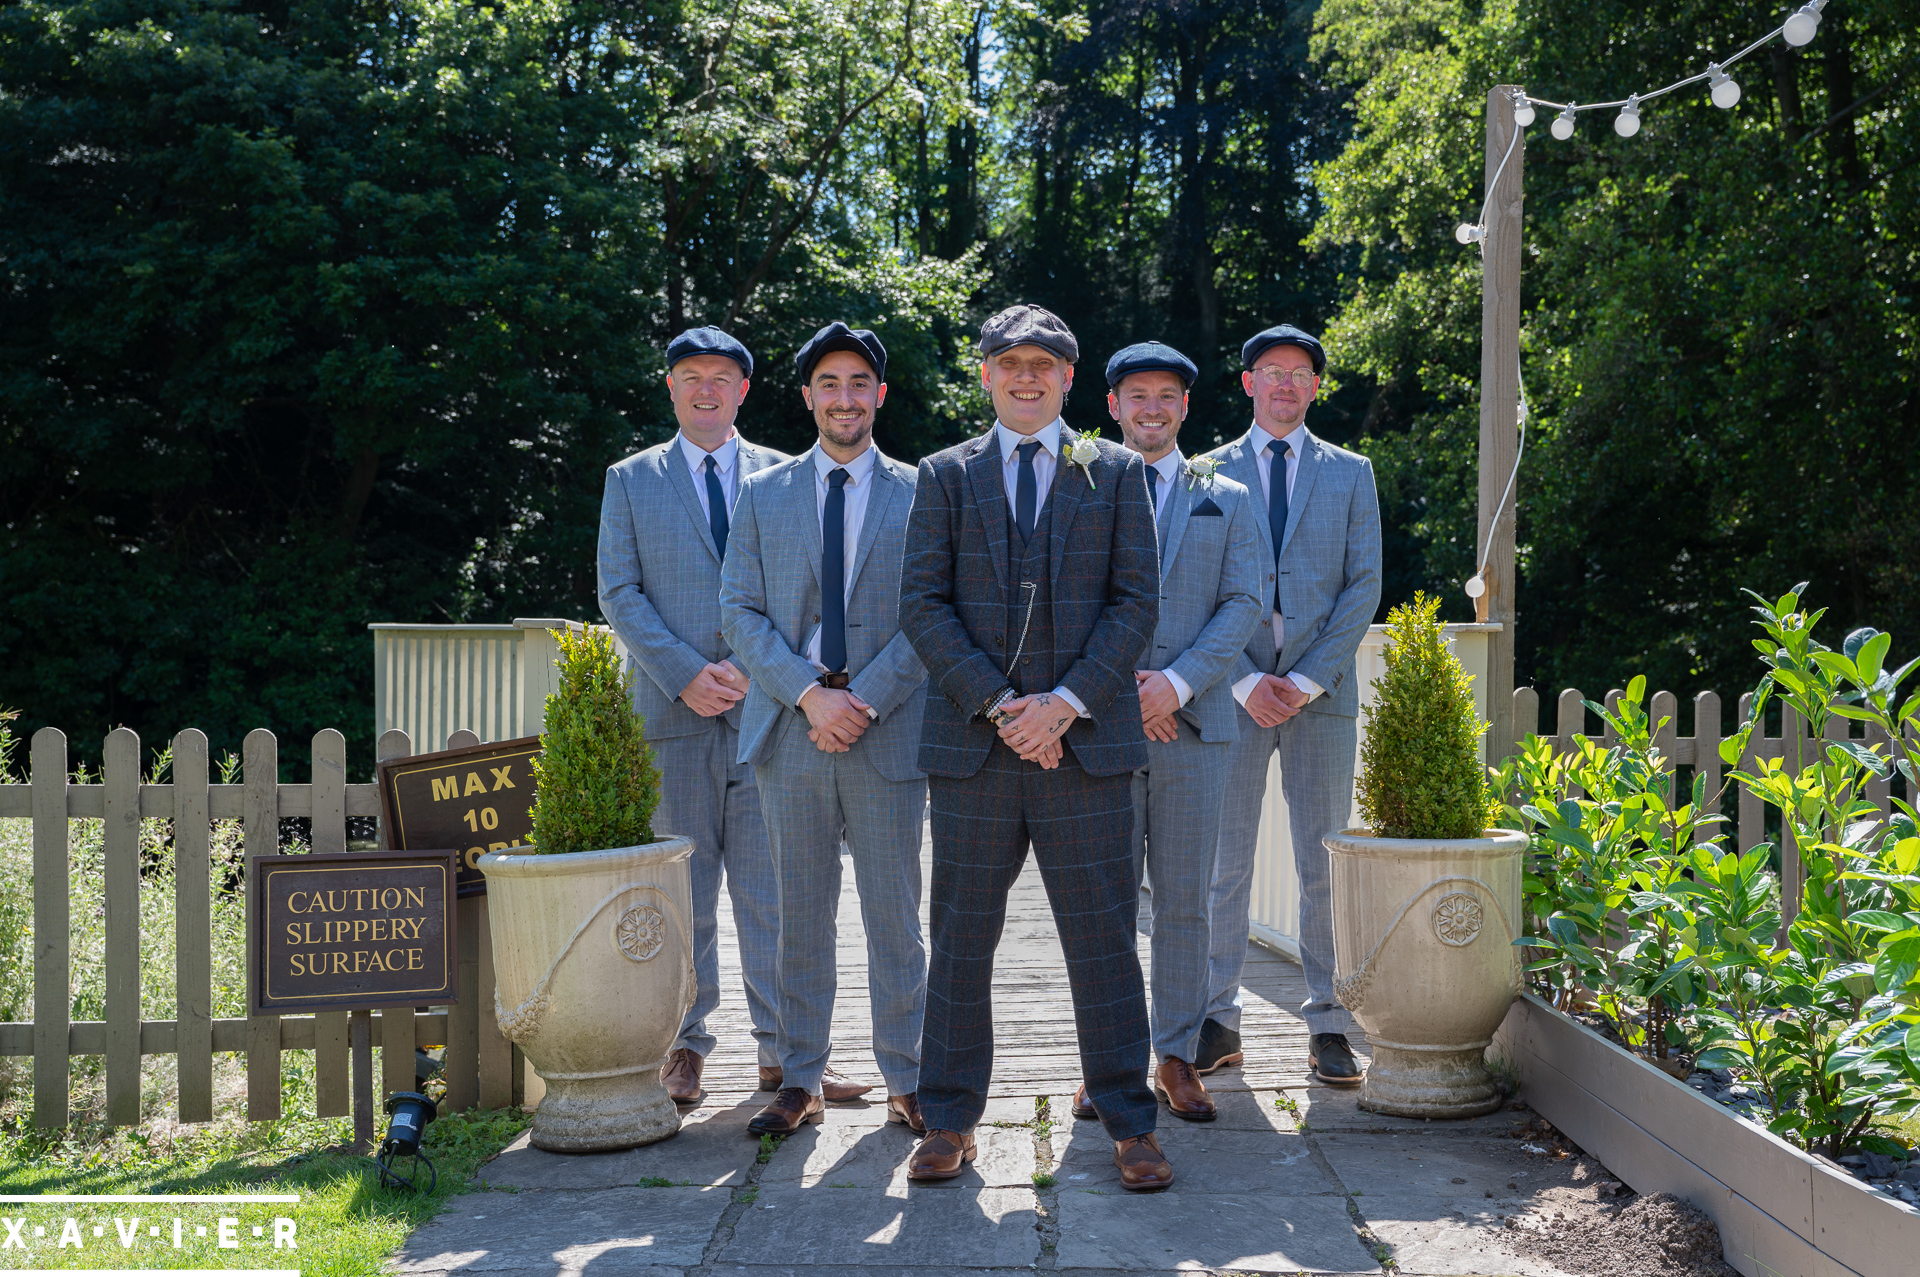 groomsmen stand together wearing suits and flatcaps 